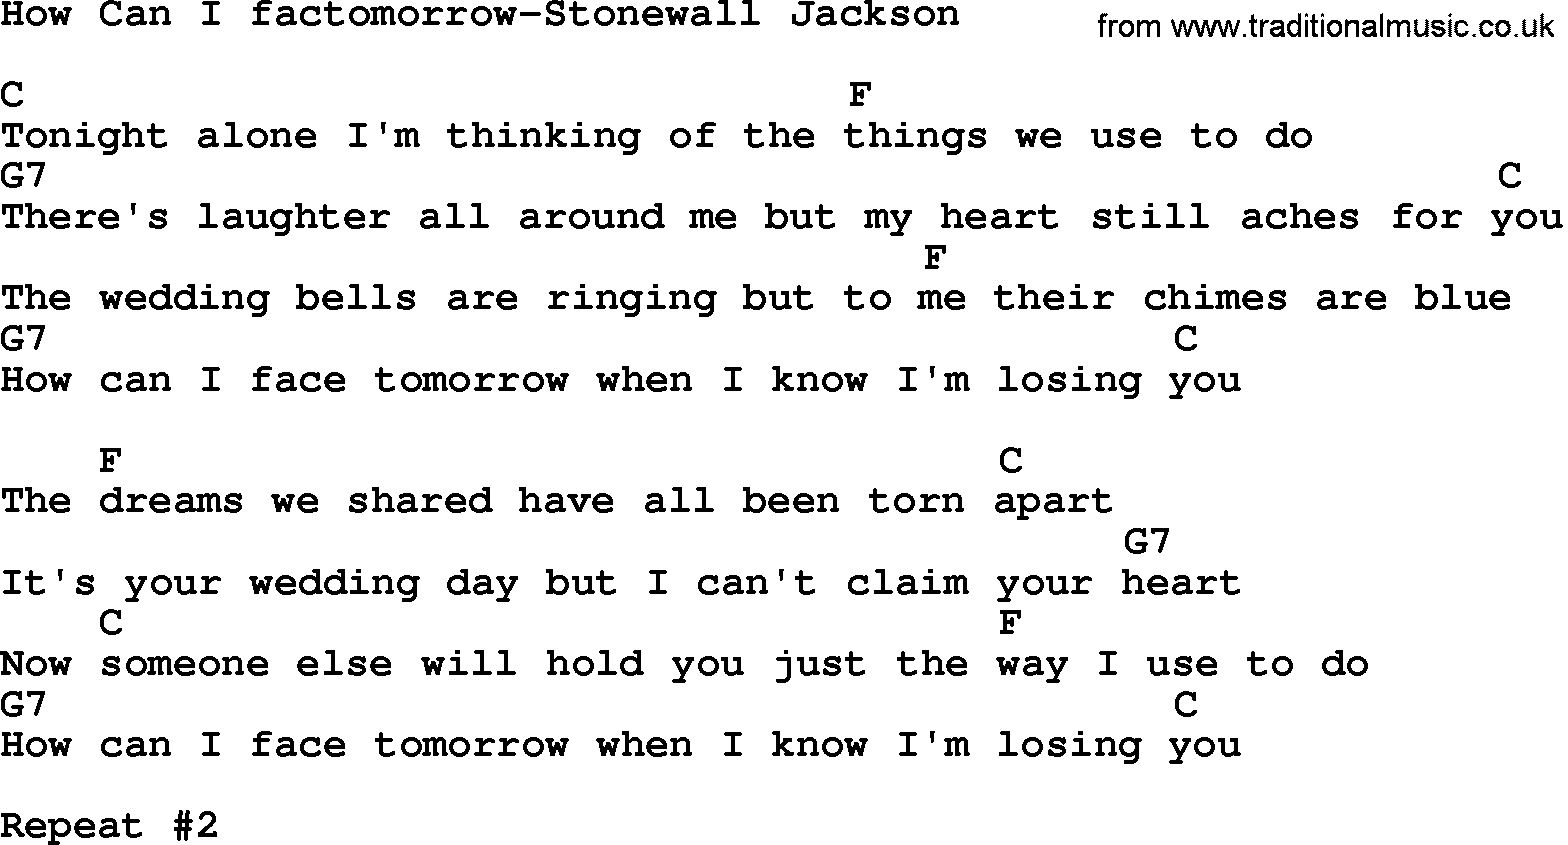 Country music song: How Can I Factomorrow-Stonewall Jackson lyrics and chords